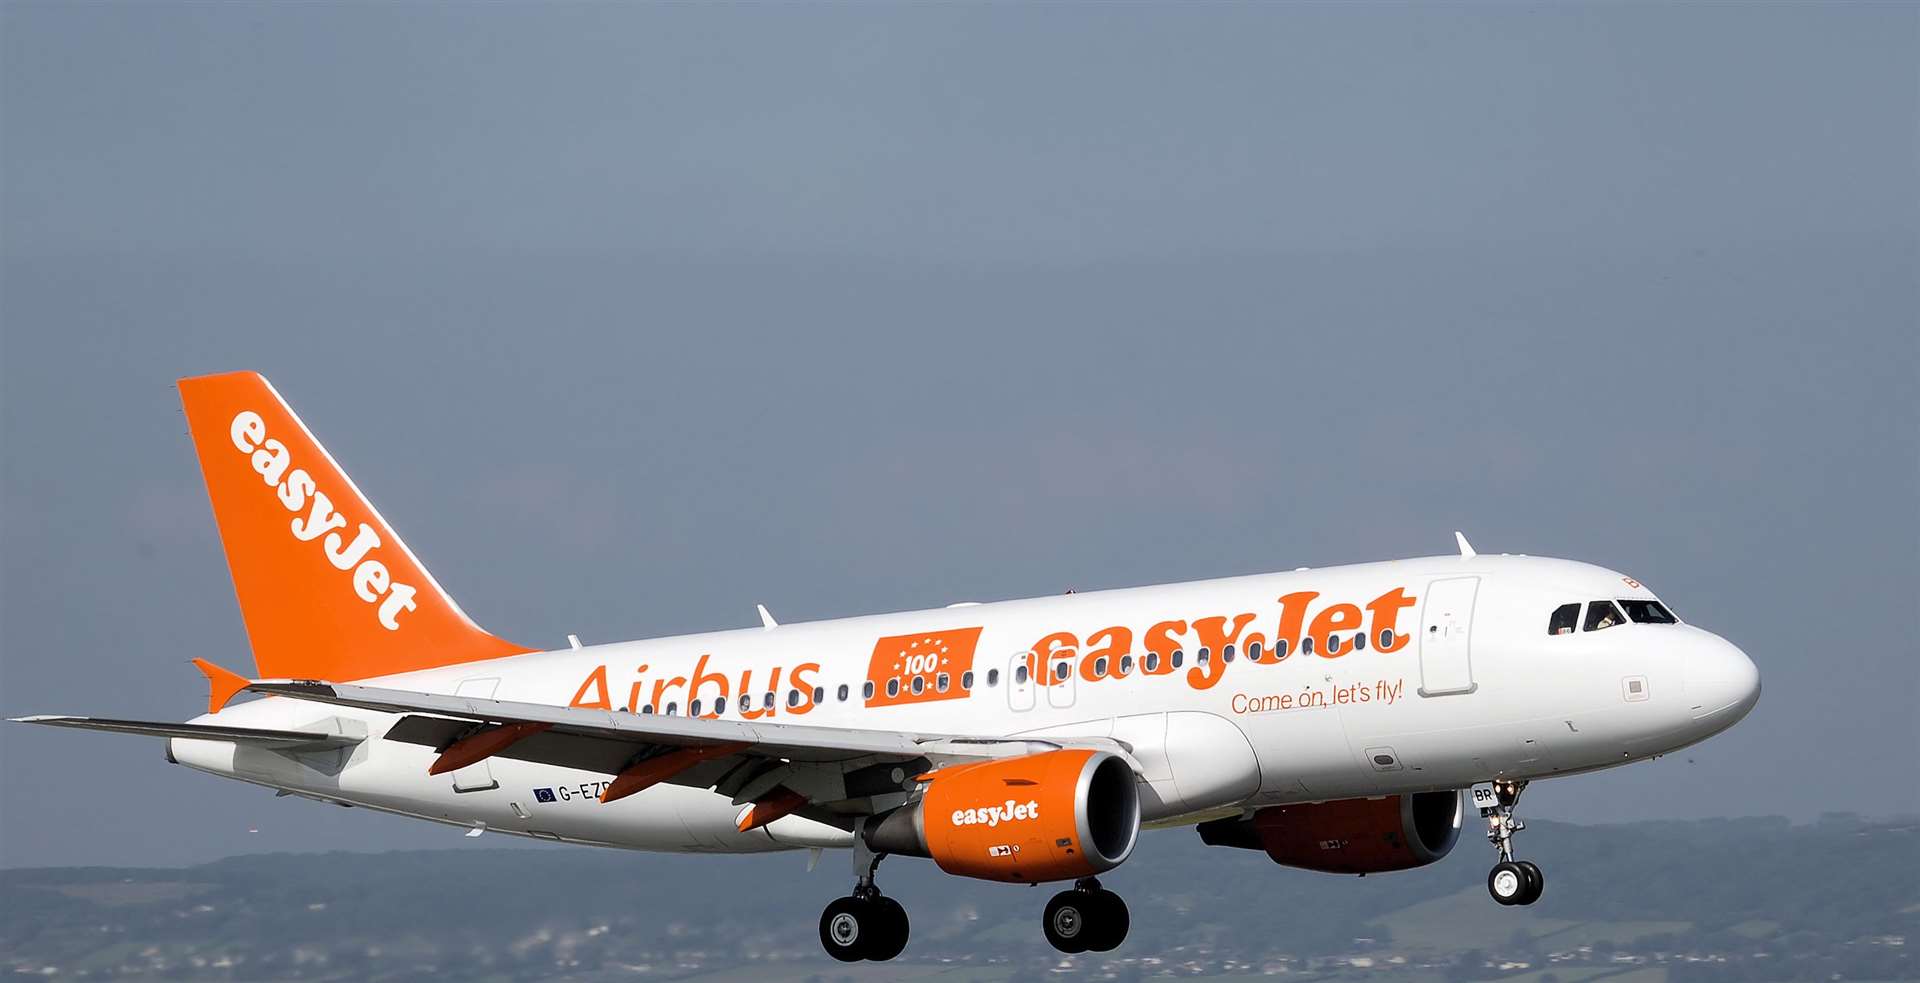 Richard Conyard helped calm the Italian who tried to open the plane of an EasyJet flight to Pisa on Wednesday